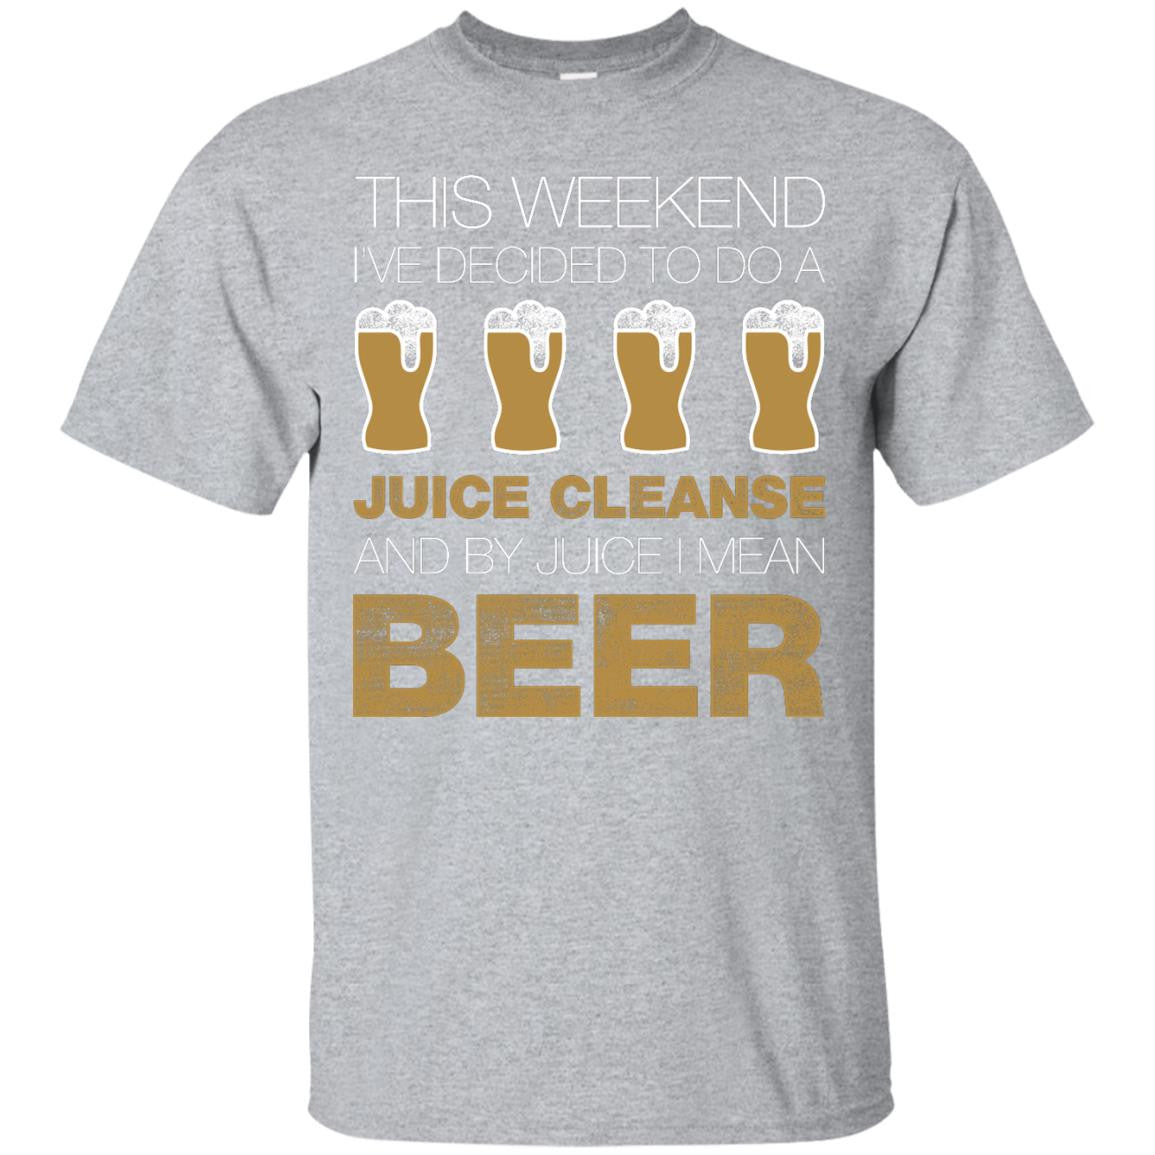 This Weekend I've Decided To Do A Juice Cleanse And By Juice I Mean Beer T-Shirt Apparel - The Beer Lodge